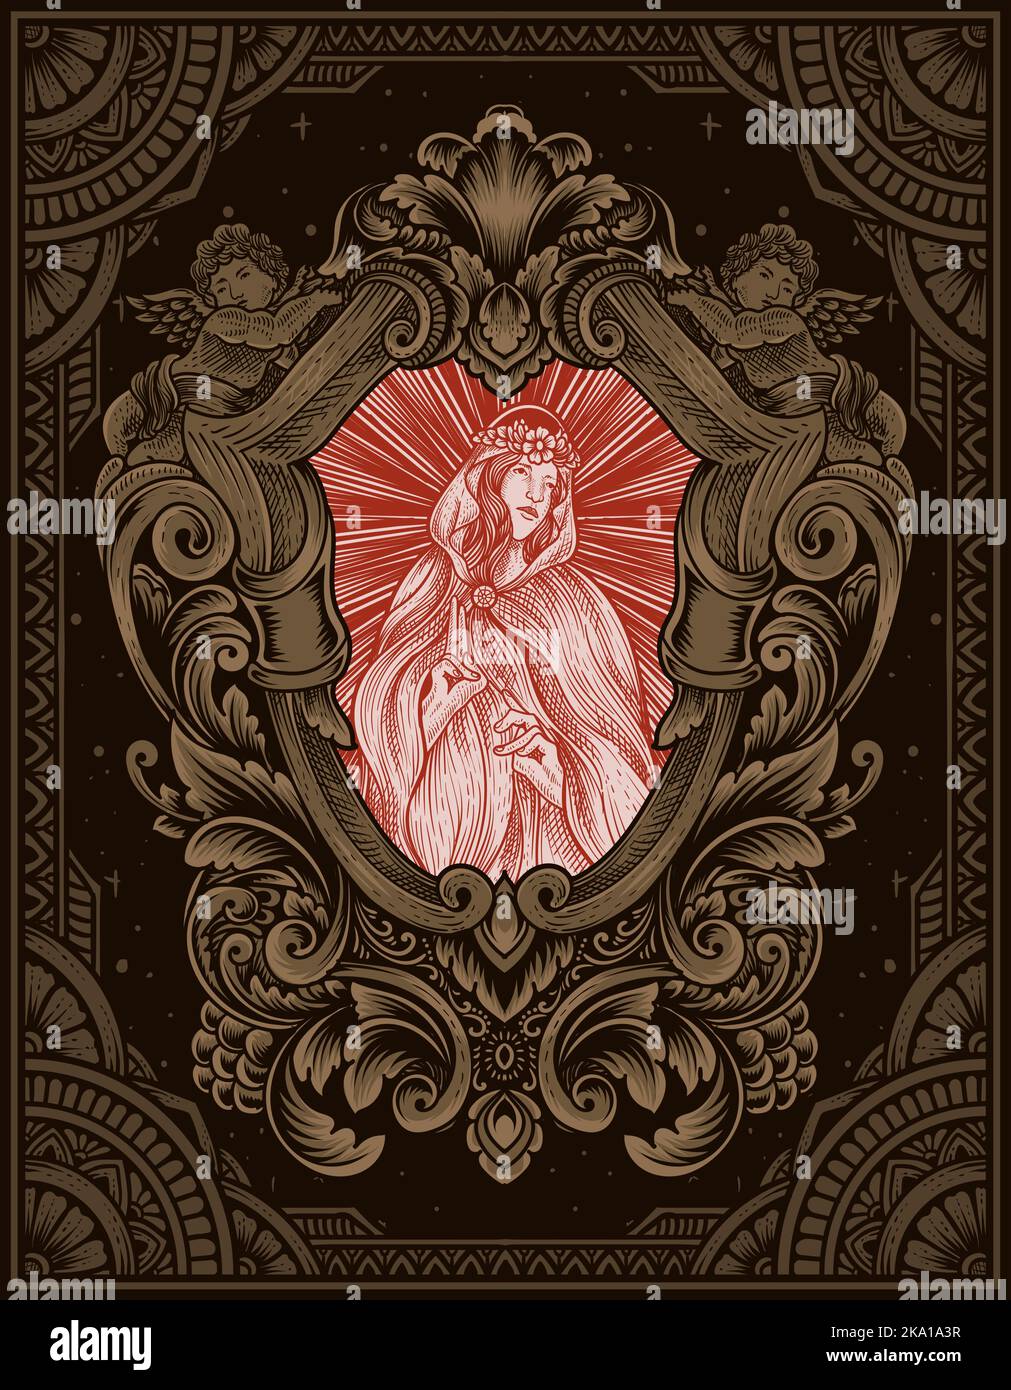 illustration vintage angel with engraving ornament style Stock Vector